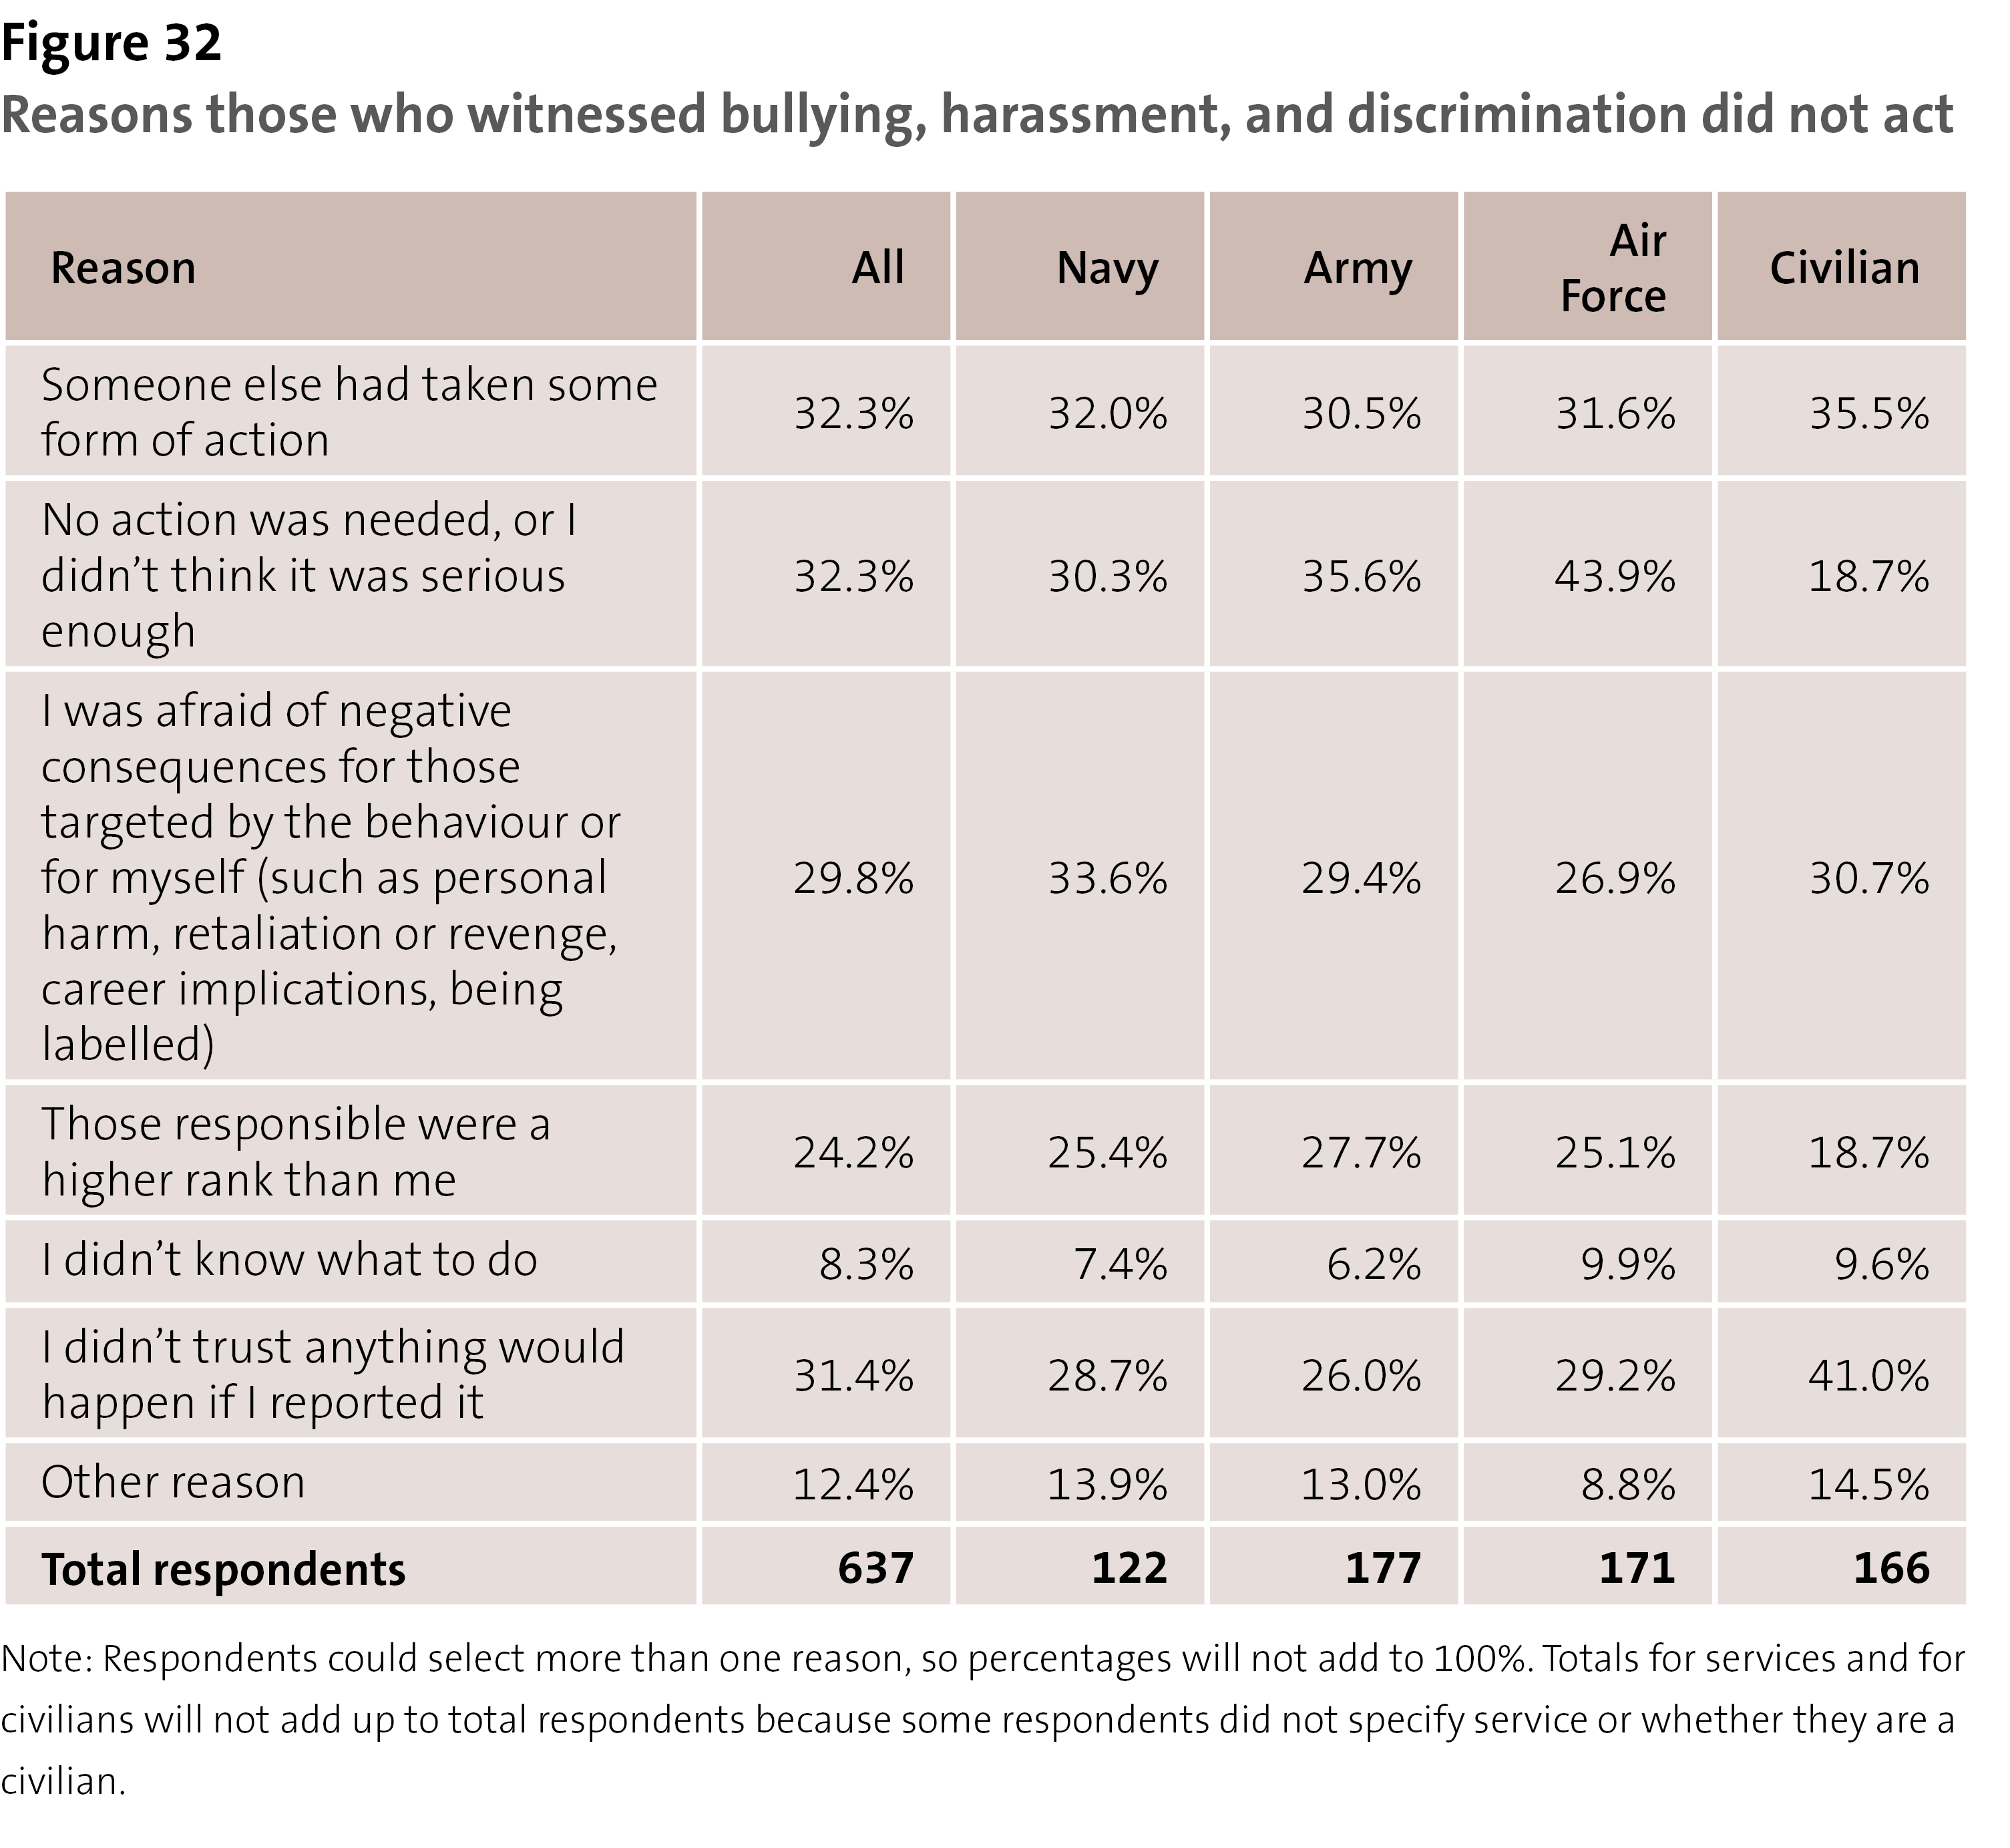 Figure 32 - Reasons those who witnessed bullying, harassment, and discrimination did not act